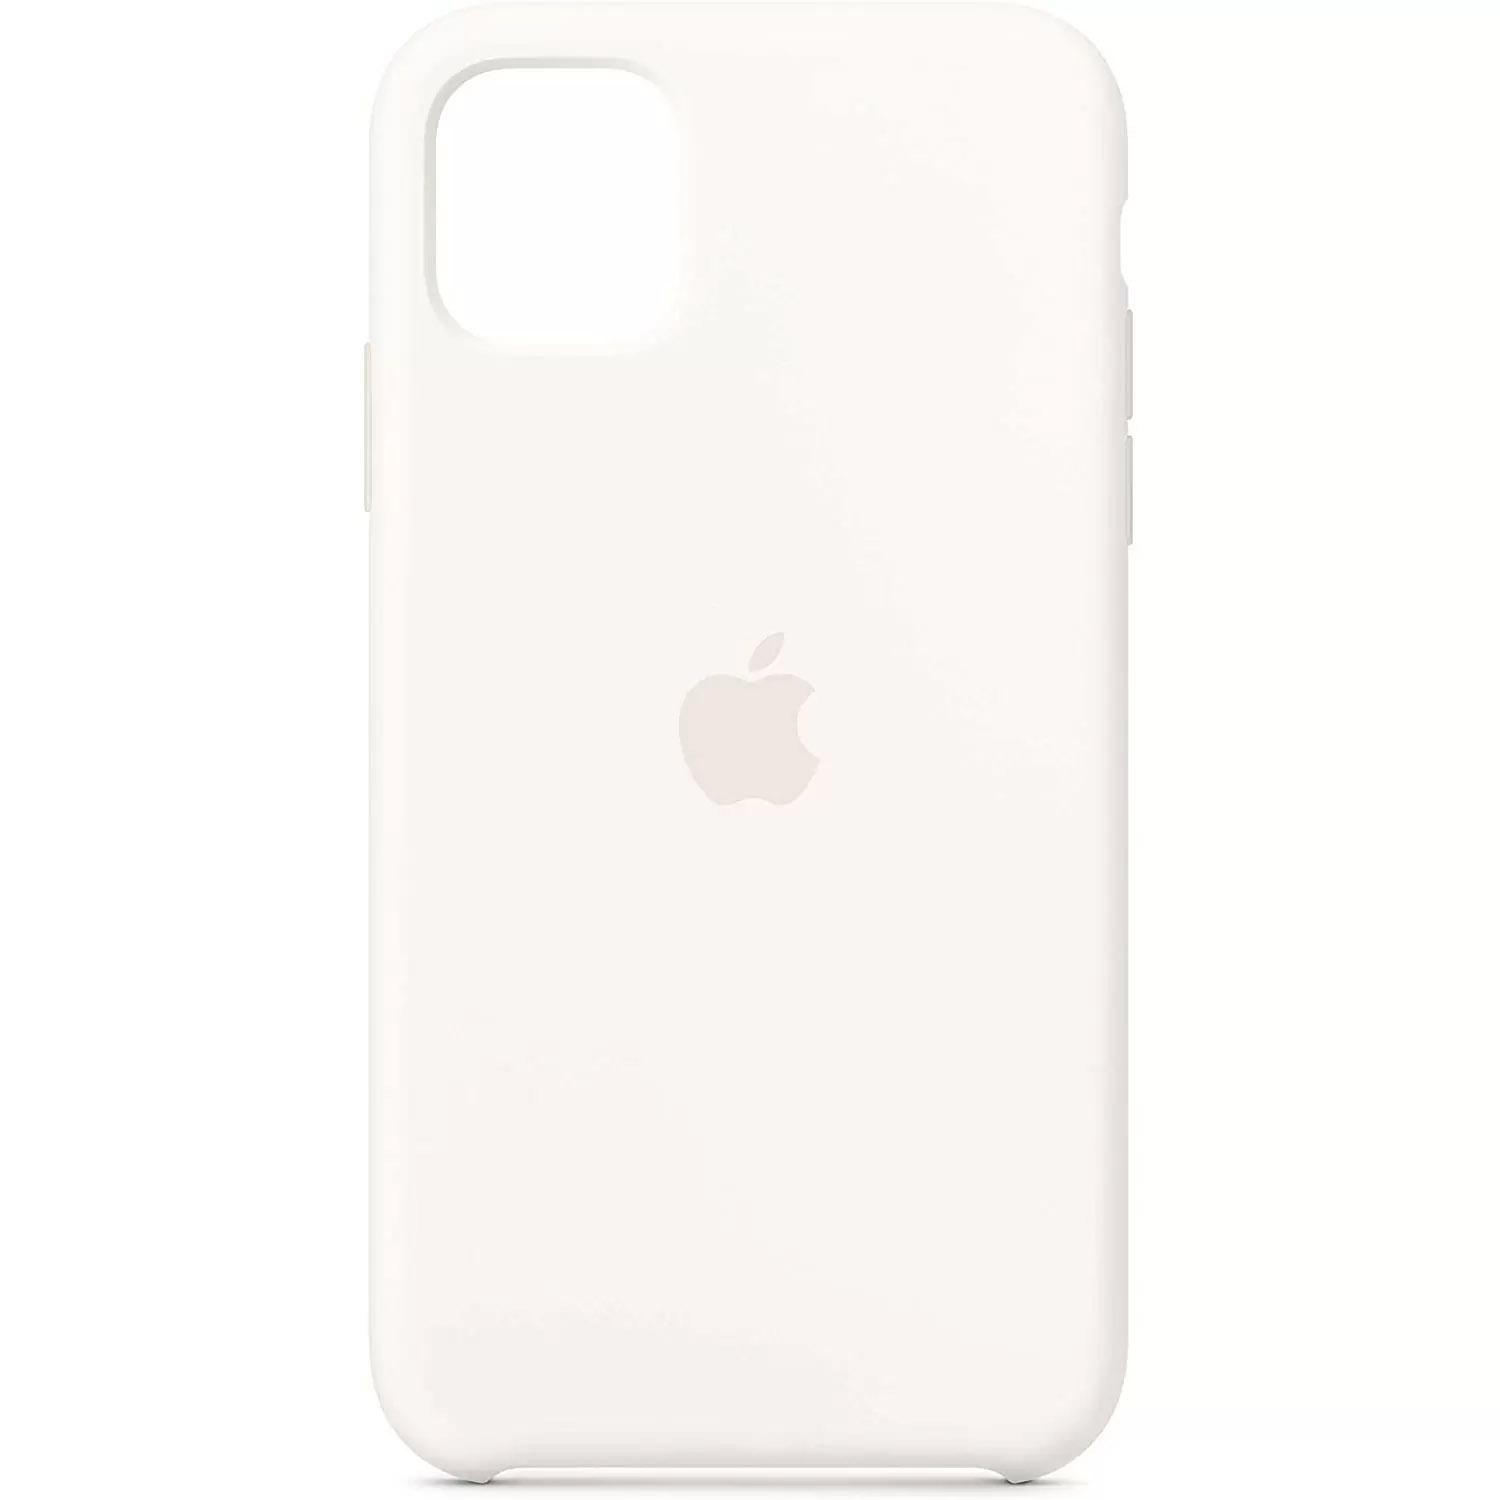 Apple iPhone 11 Silicone Case for $9.99 Shipped